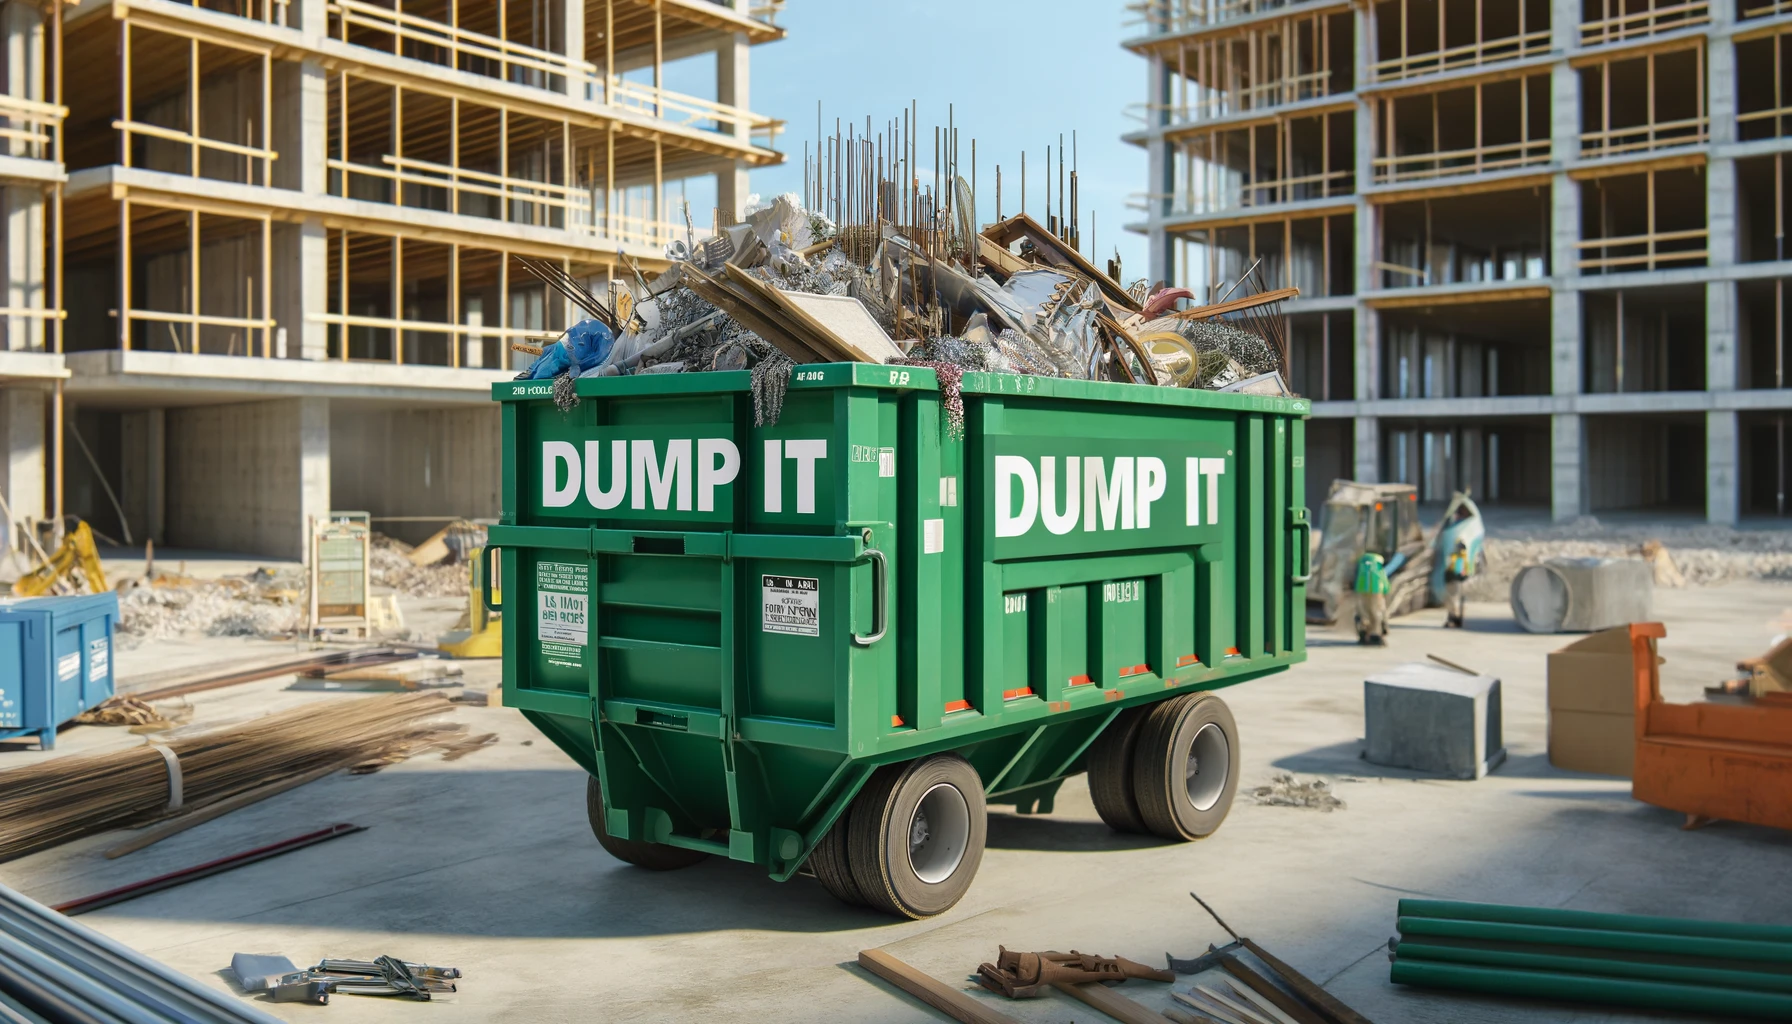 "Dump It dumpster at a construction site with debris and workers"